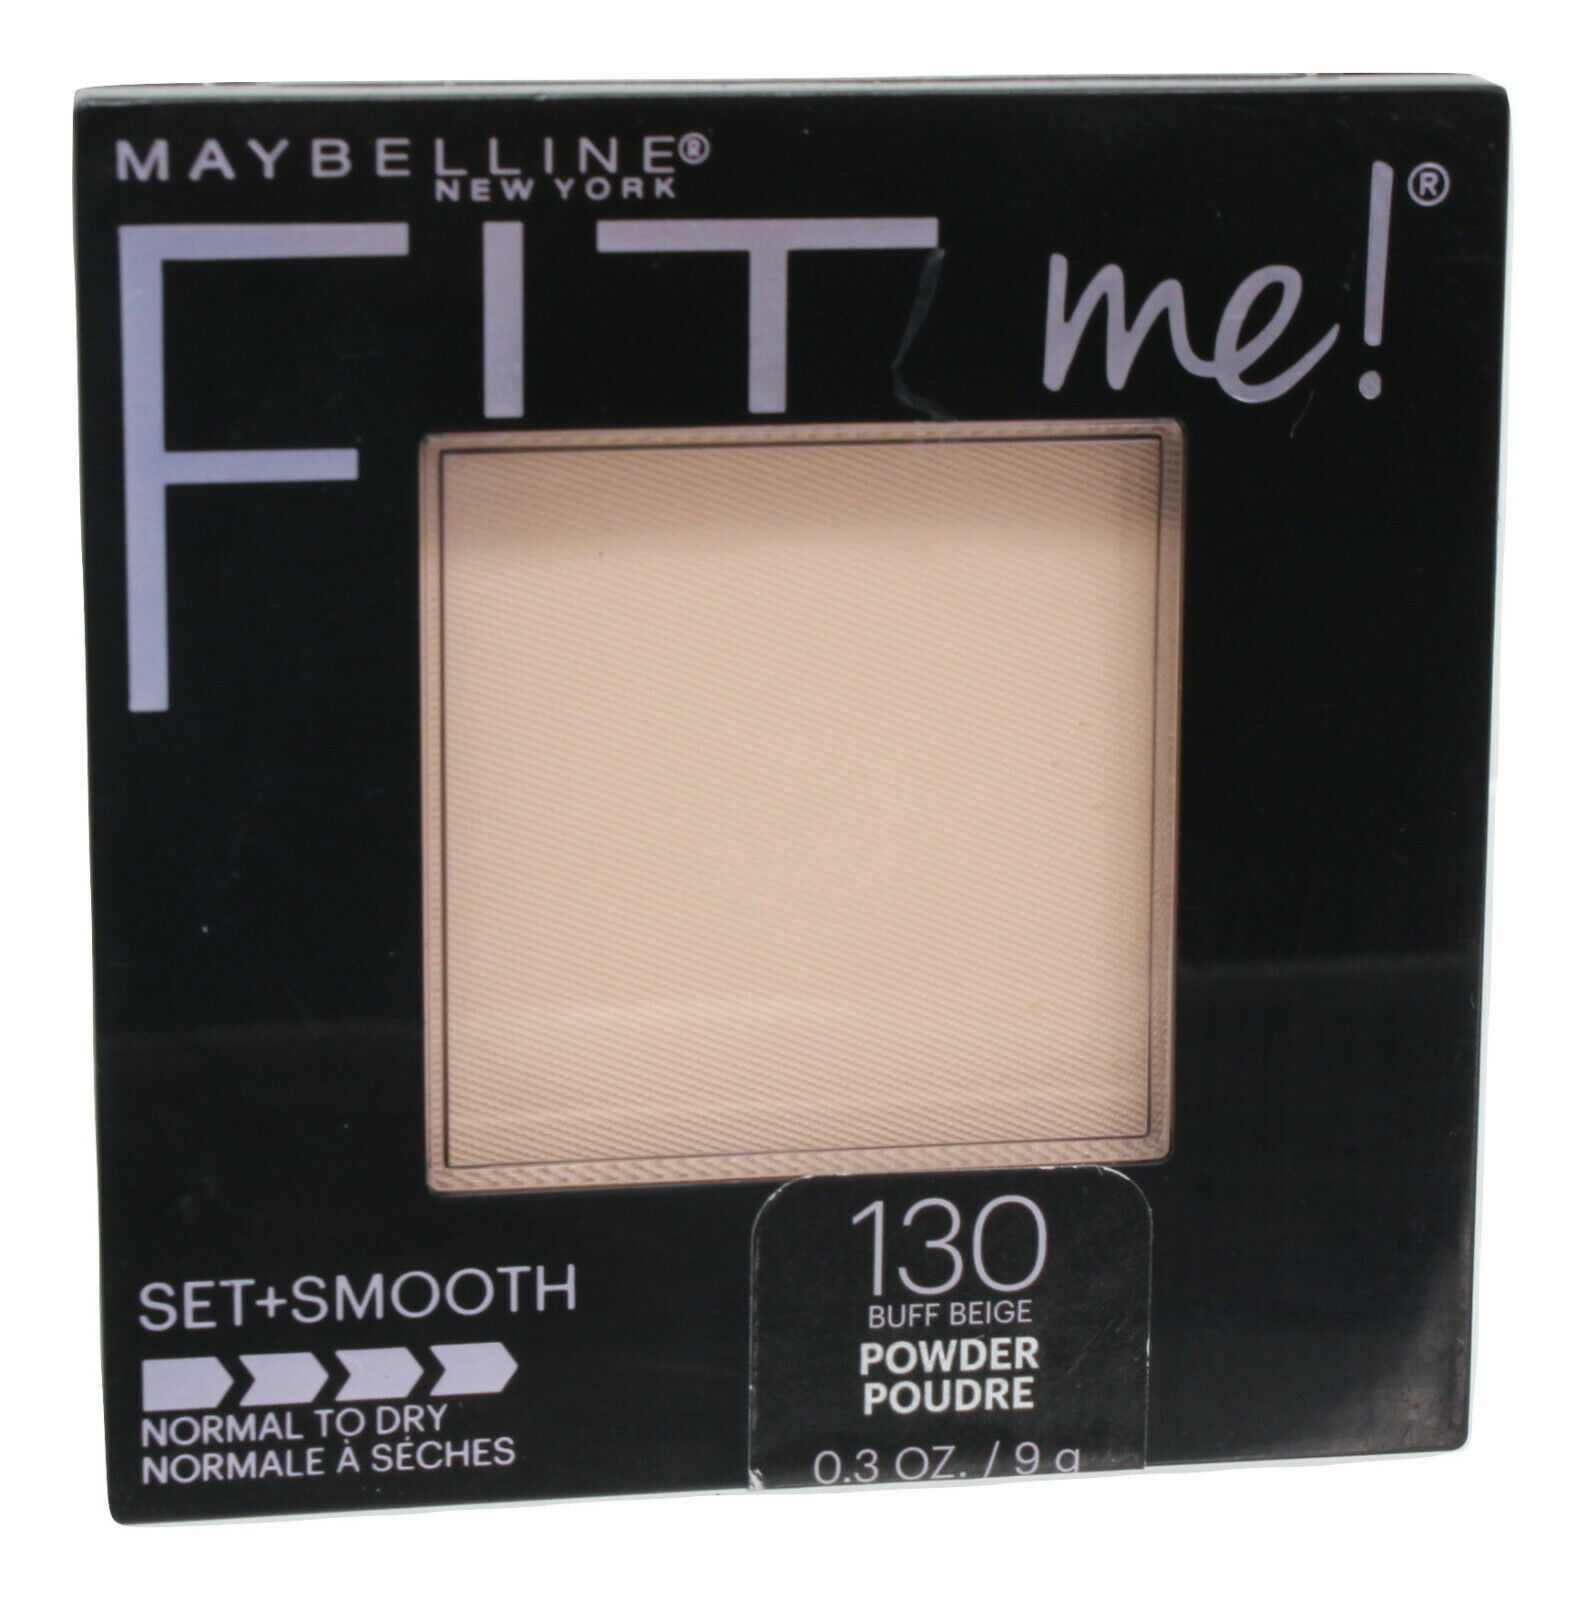 Maybelline New York Fit Me! Set + Smooth Buff Beige Pressed Powder 0.3oz Compact - $9.89